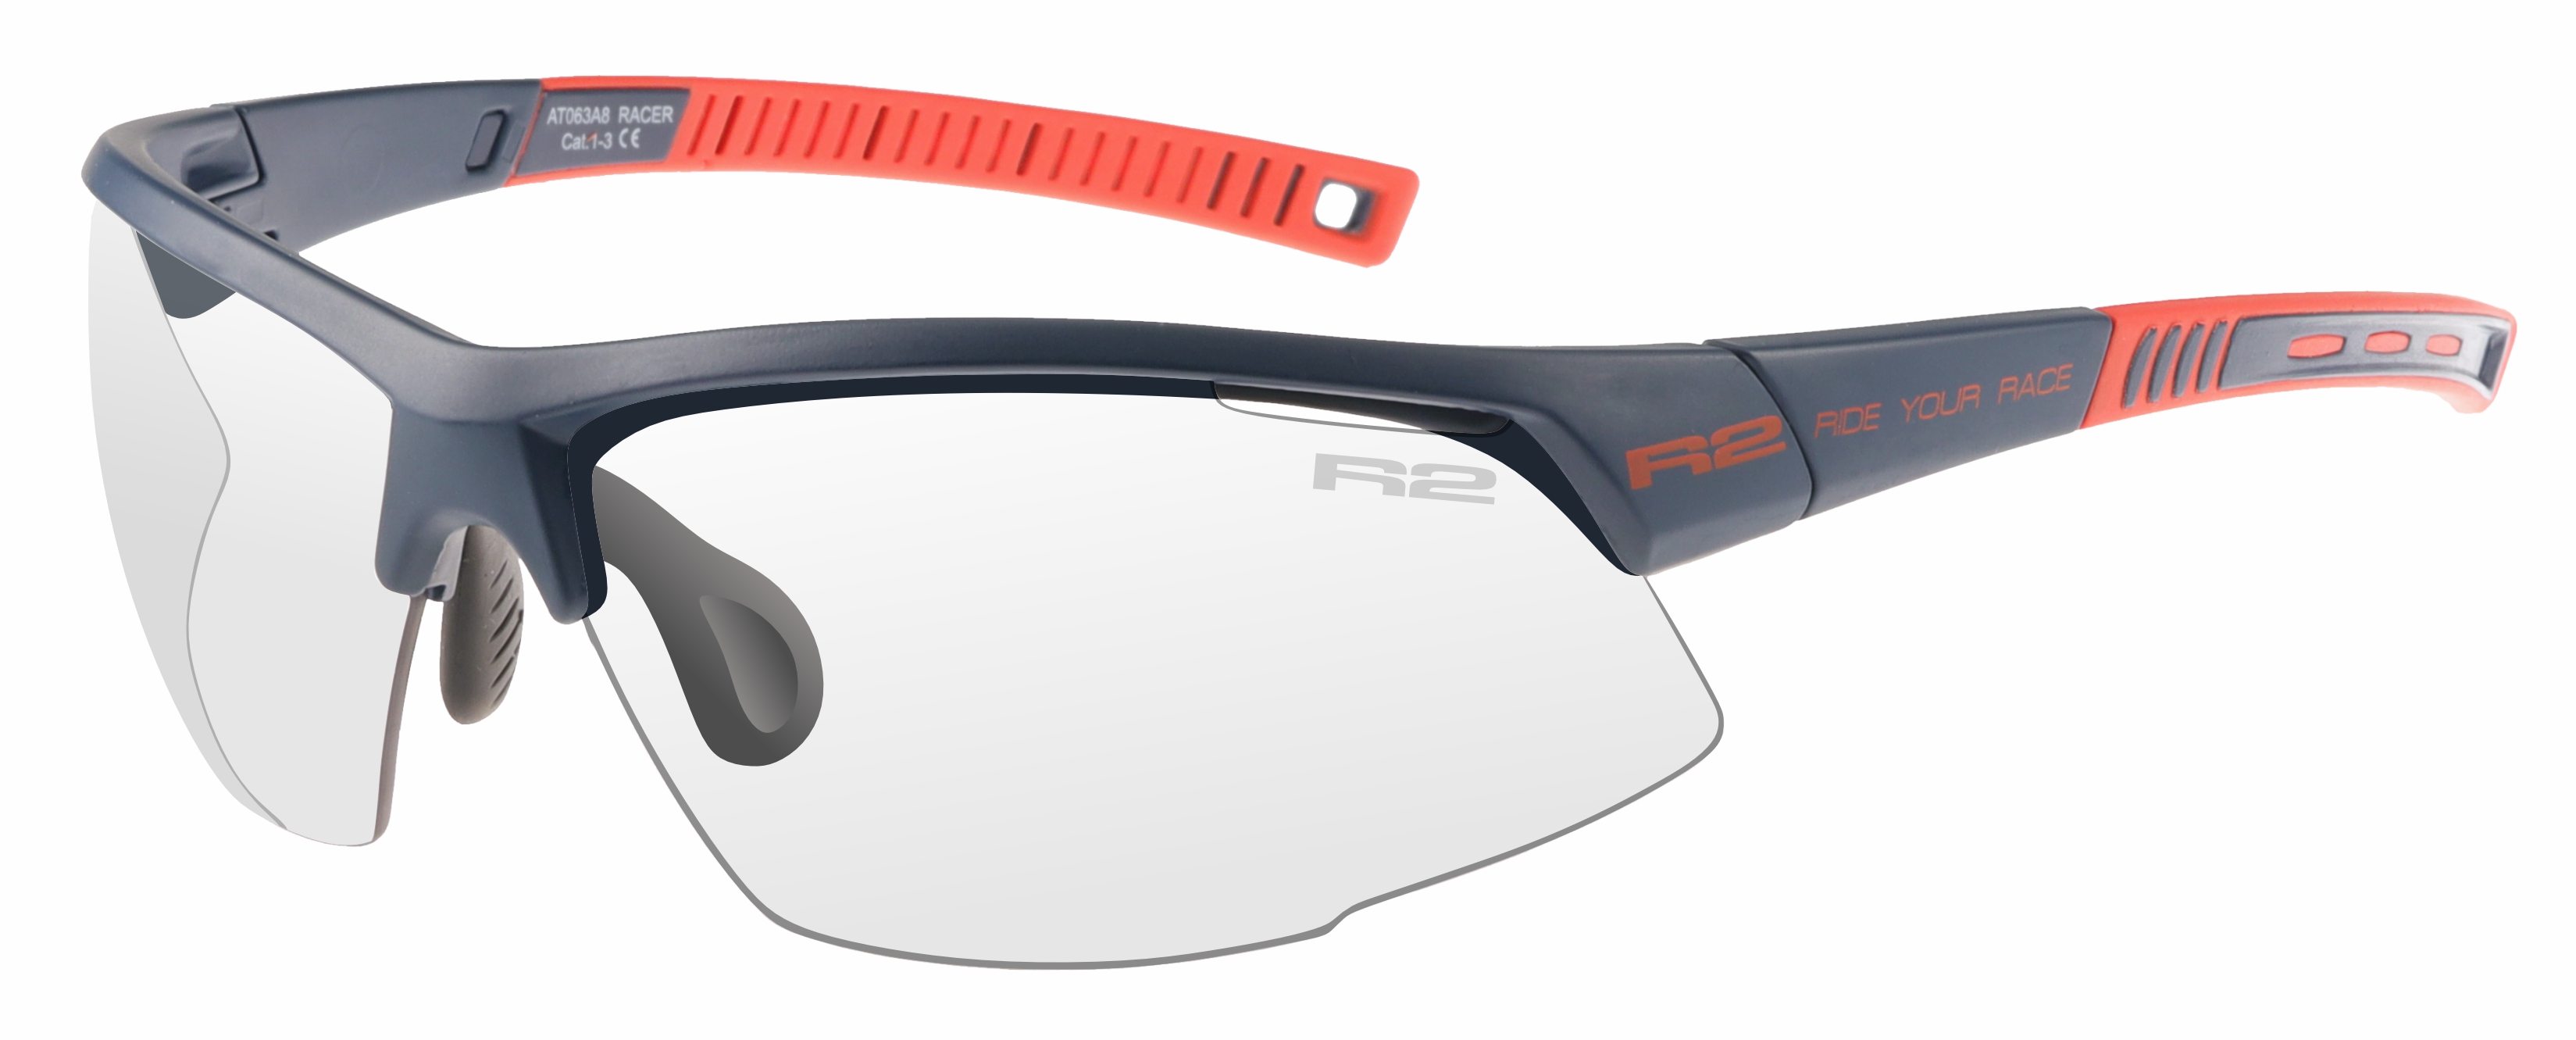 Photochromatic sunglasses  R2 RACER AT063A8